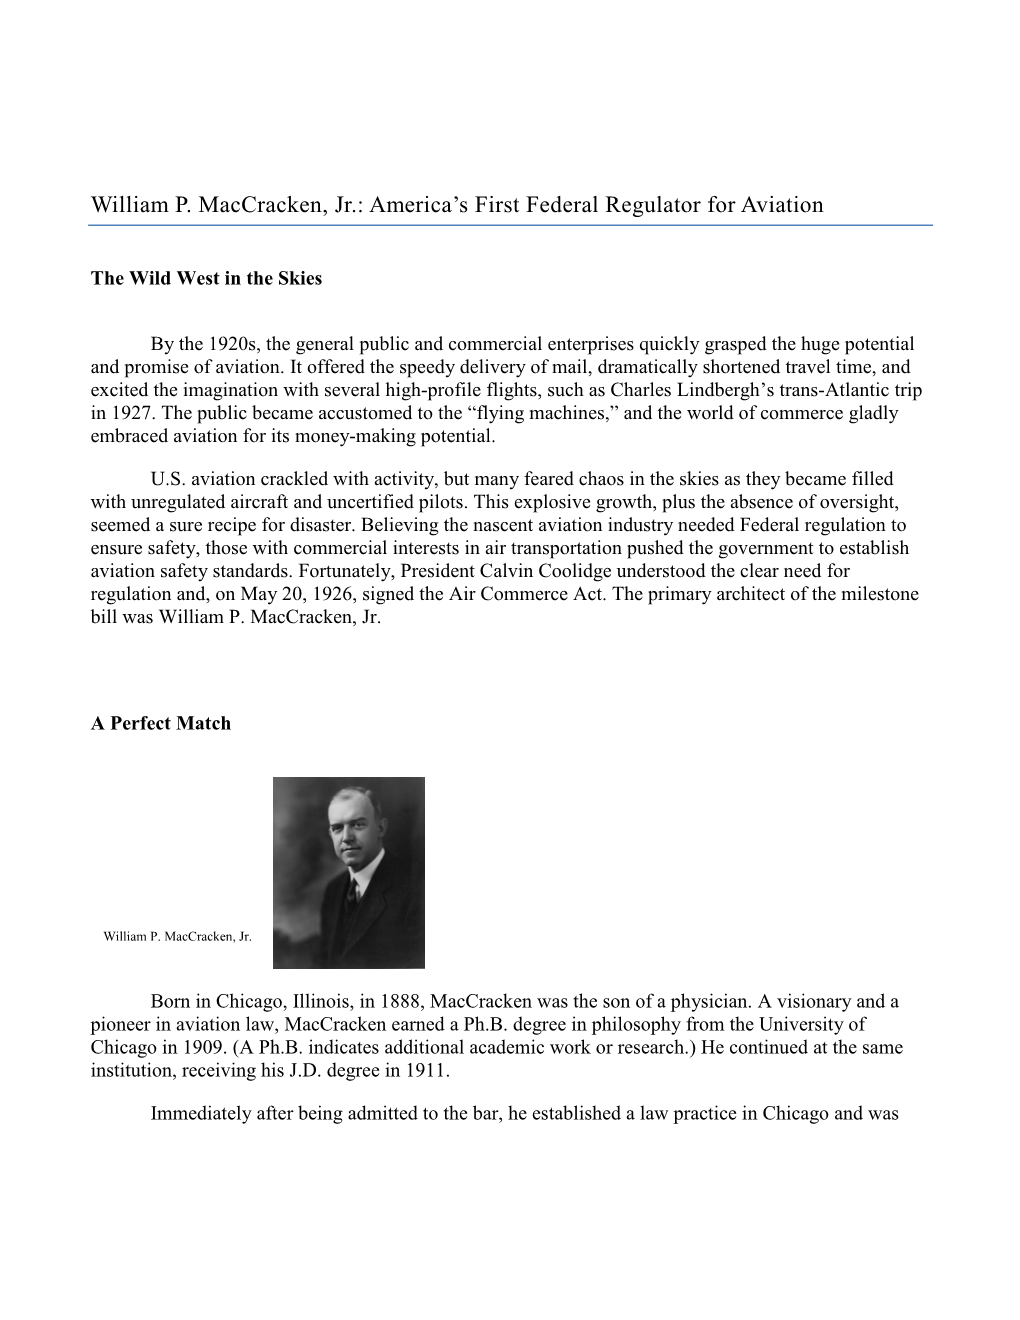 The First Federal Regulator for Aviation